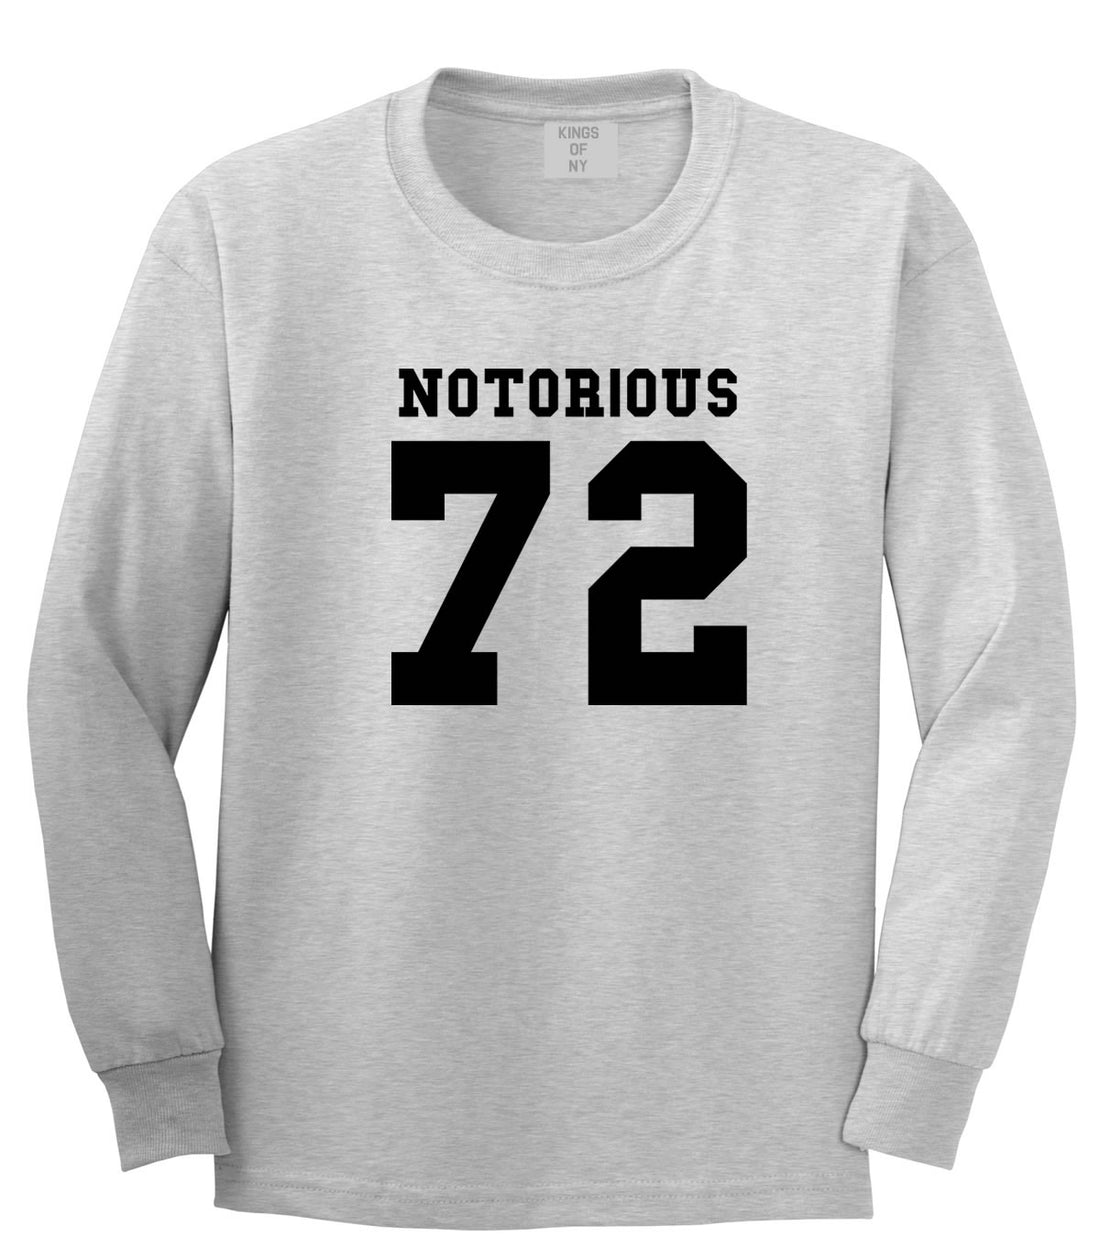 Notorious 72 Team Long Sleeve T-Shirt in Grey by Kings Of NY